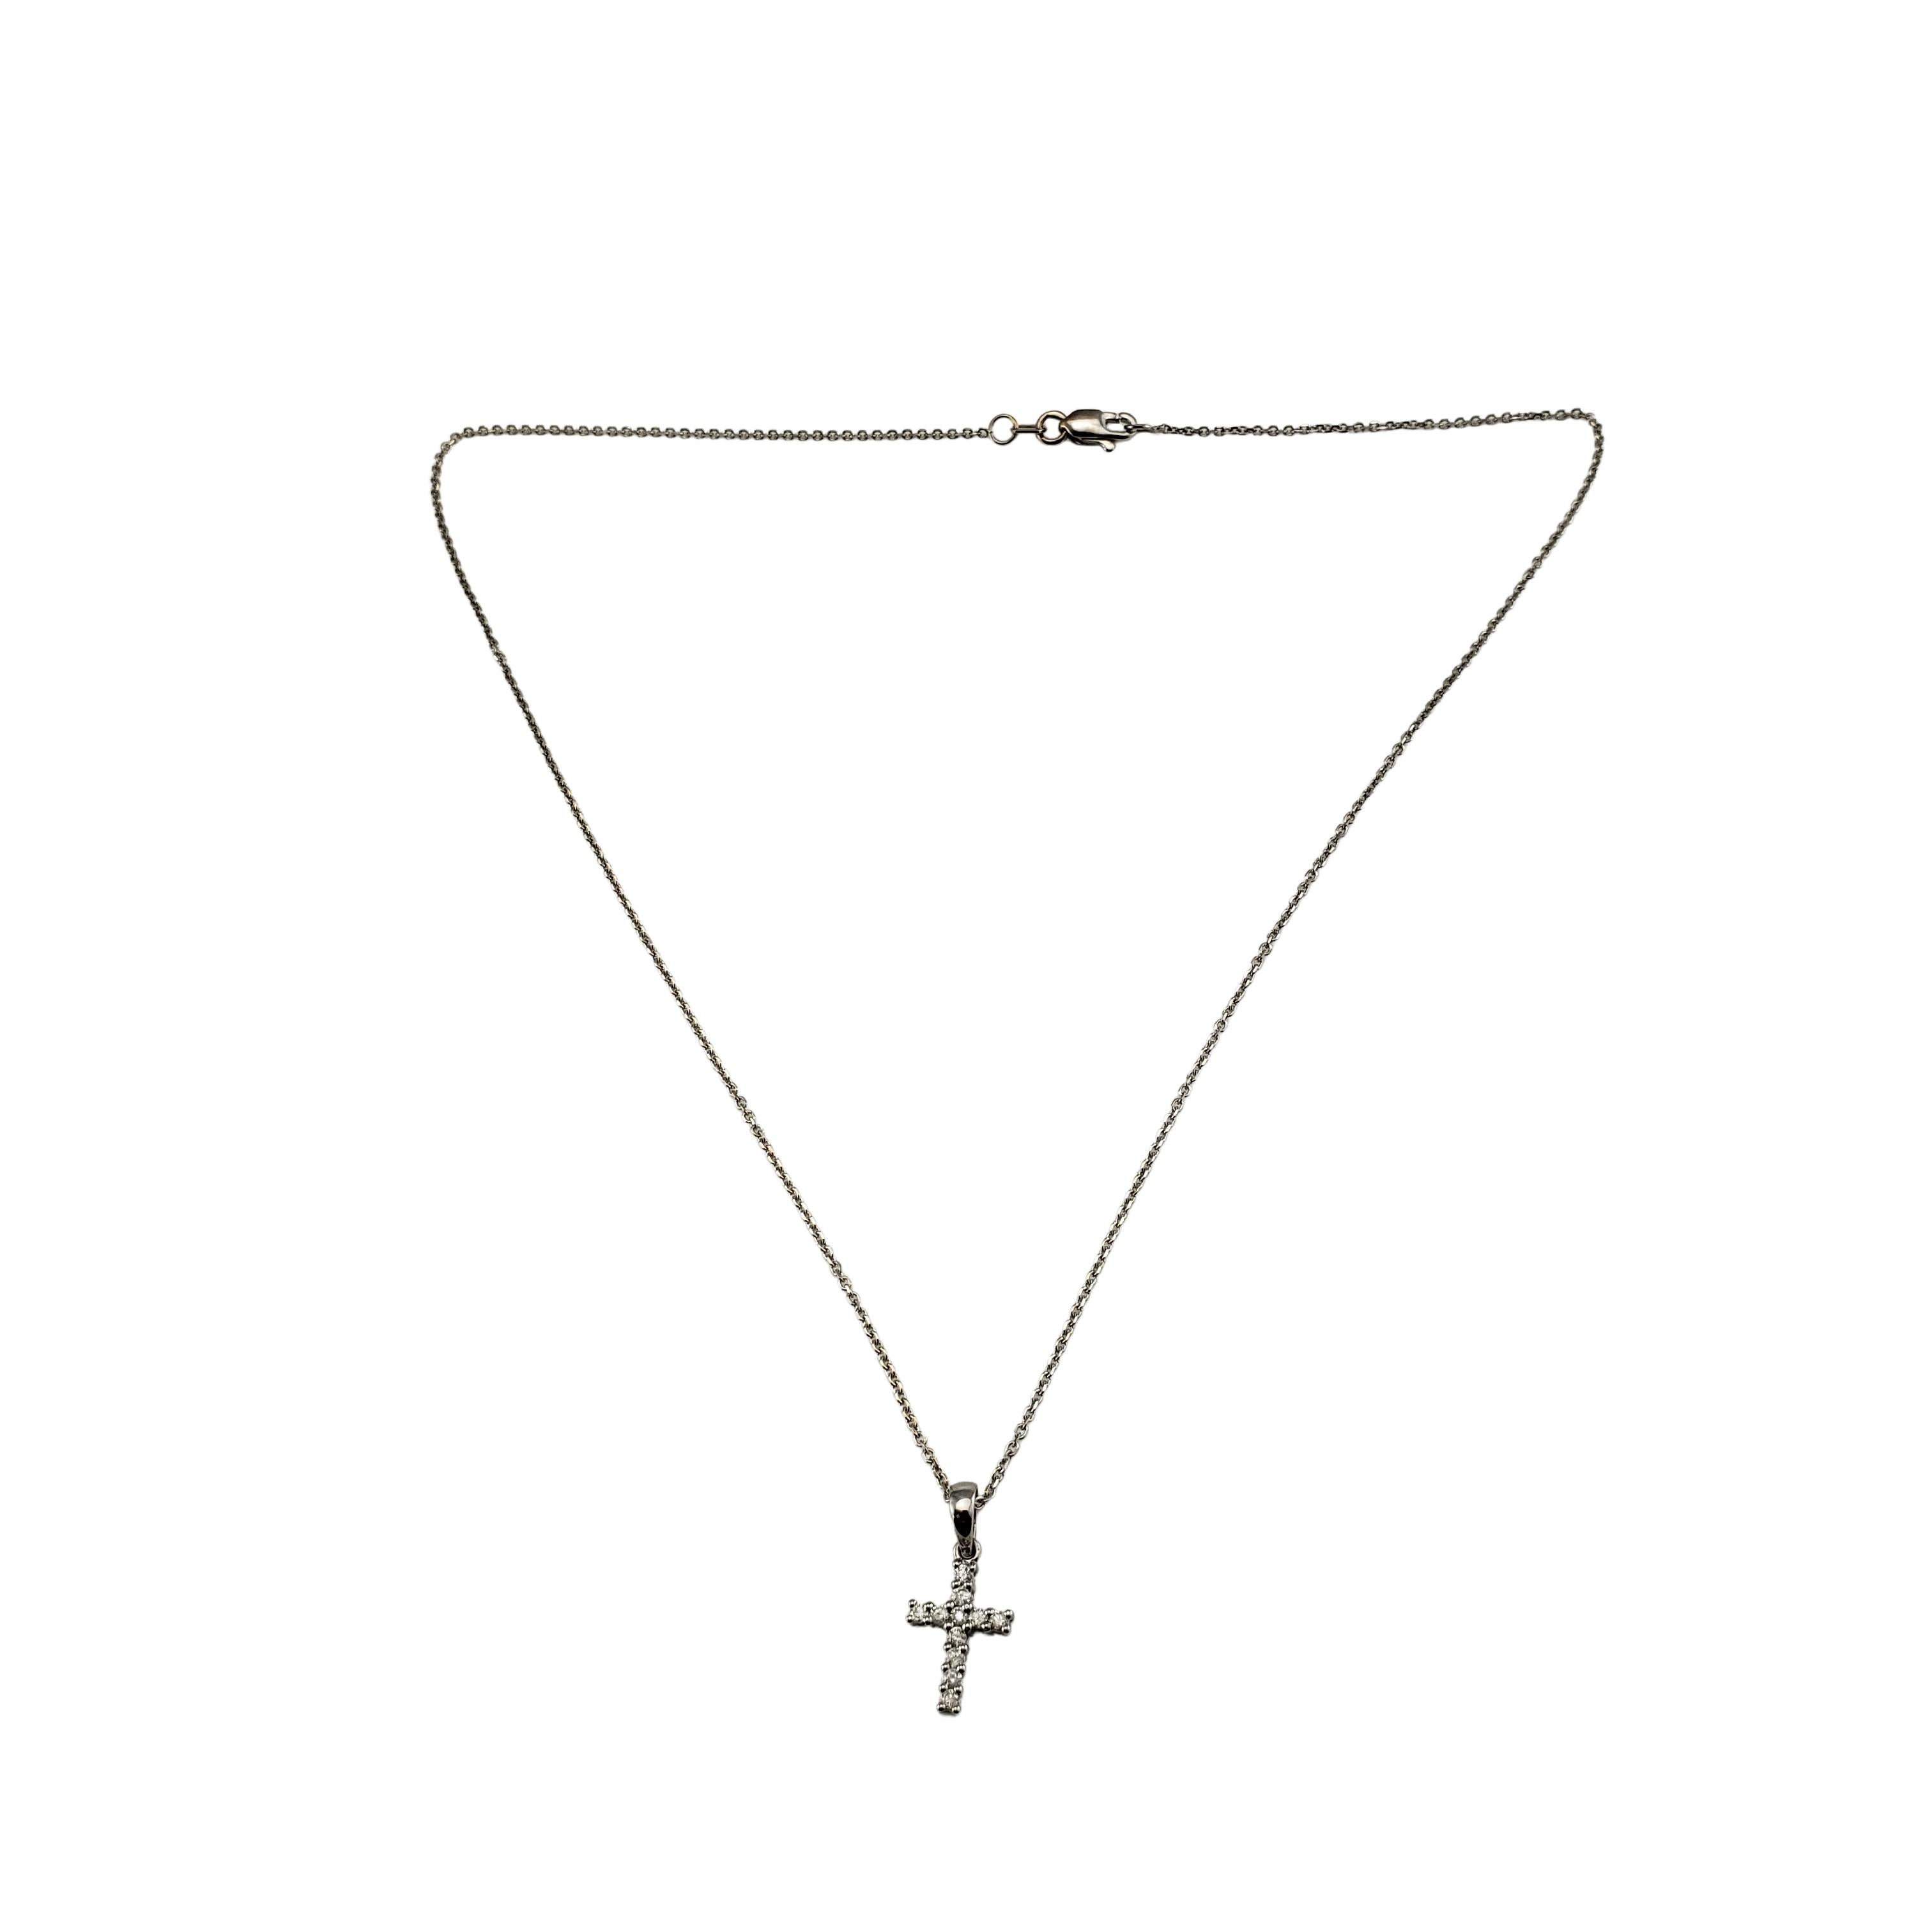 Vintage 14 Karat White Gold and Diamond Cross Pendant Necklace-

This sparkling cross pendant features 11 round brilliant cut diamonds set in classic 14K gold. Suspends from a classic cable chain.

Approximate total diamond weight: .12 ct.

Diamond